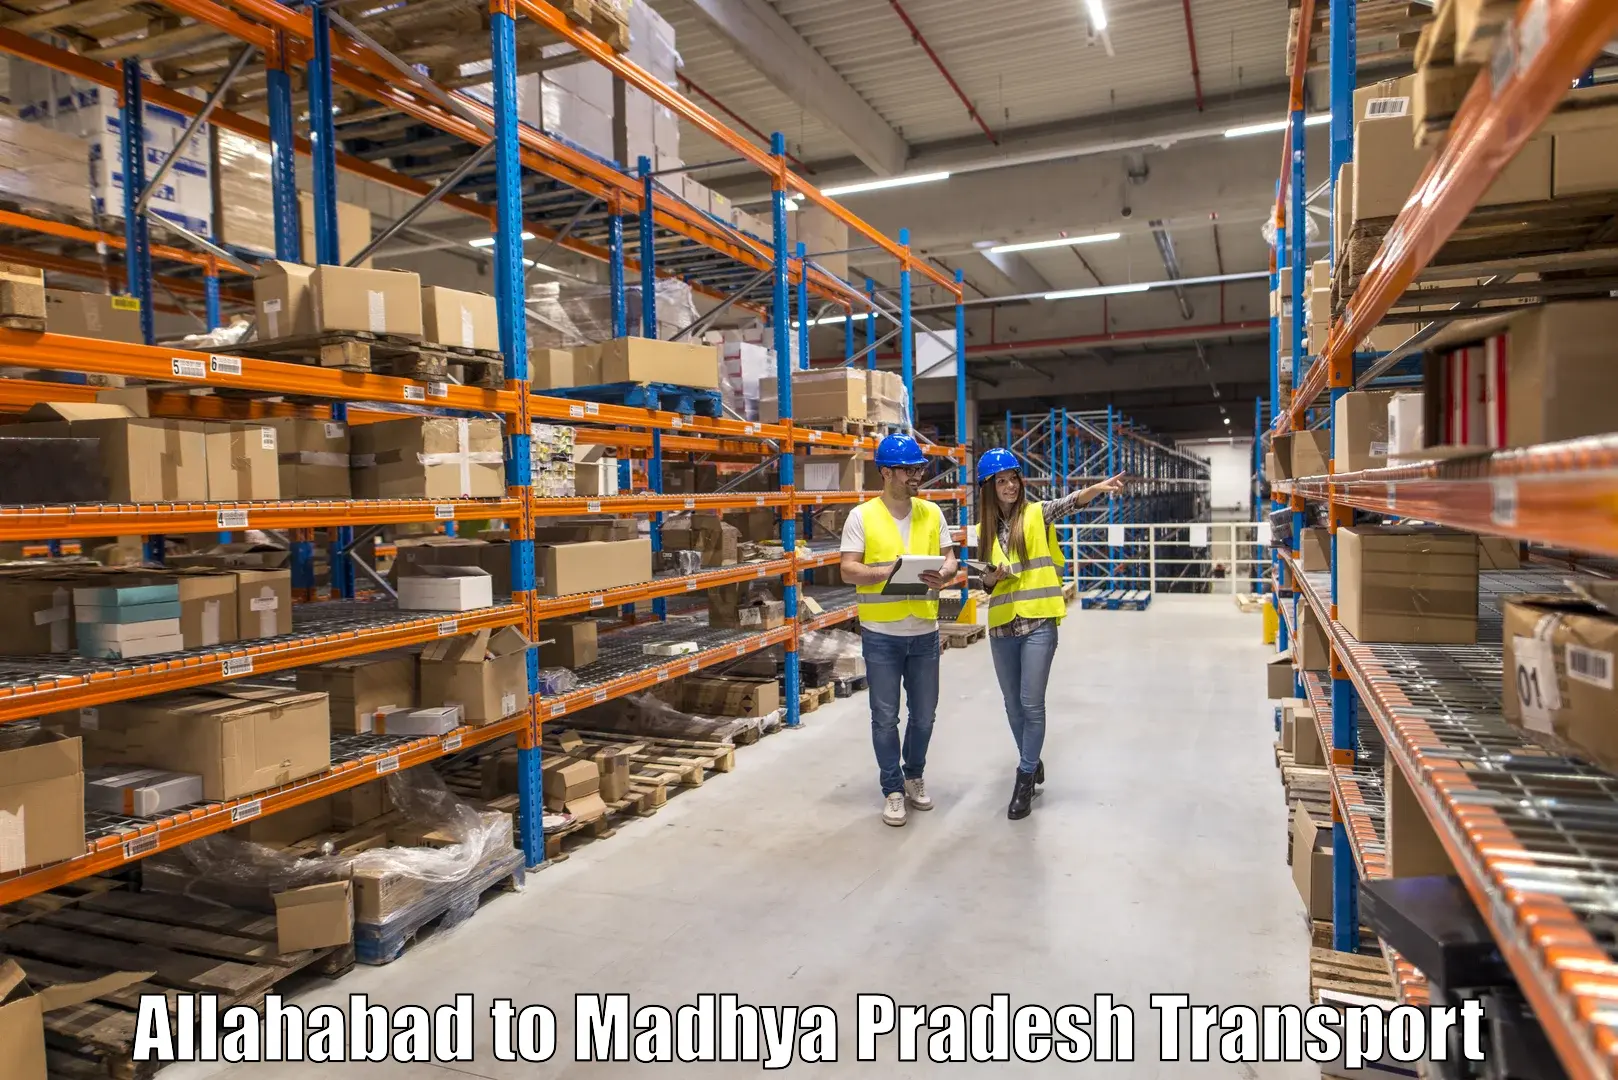 Material transport services Allahabad to Gwalior